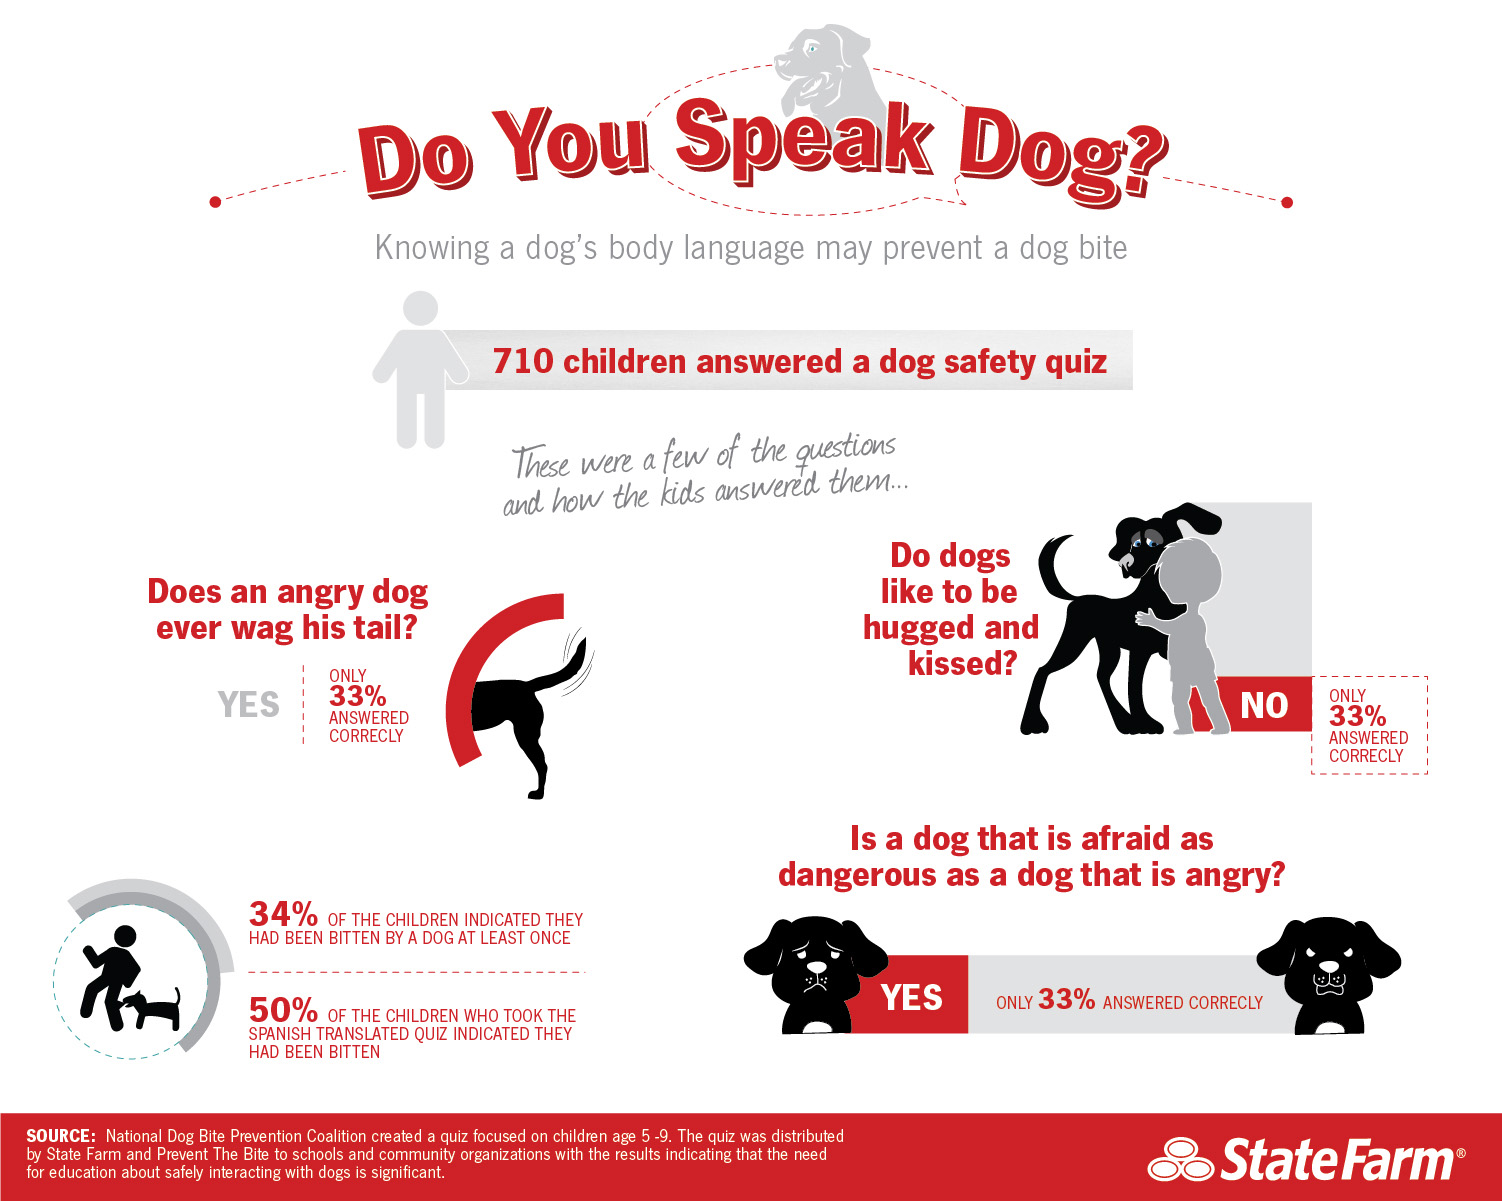 Knowing a dog’s body language may prevent a dog bite